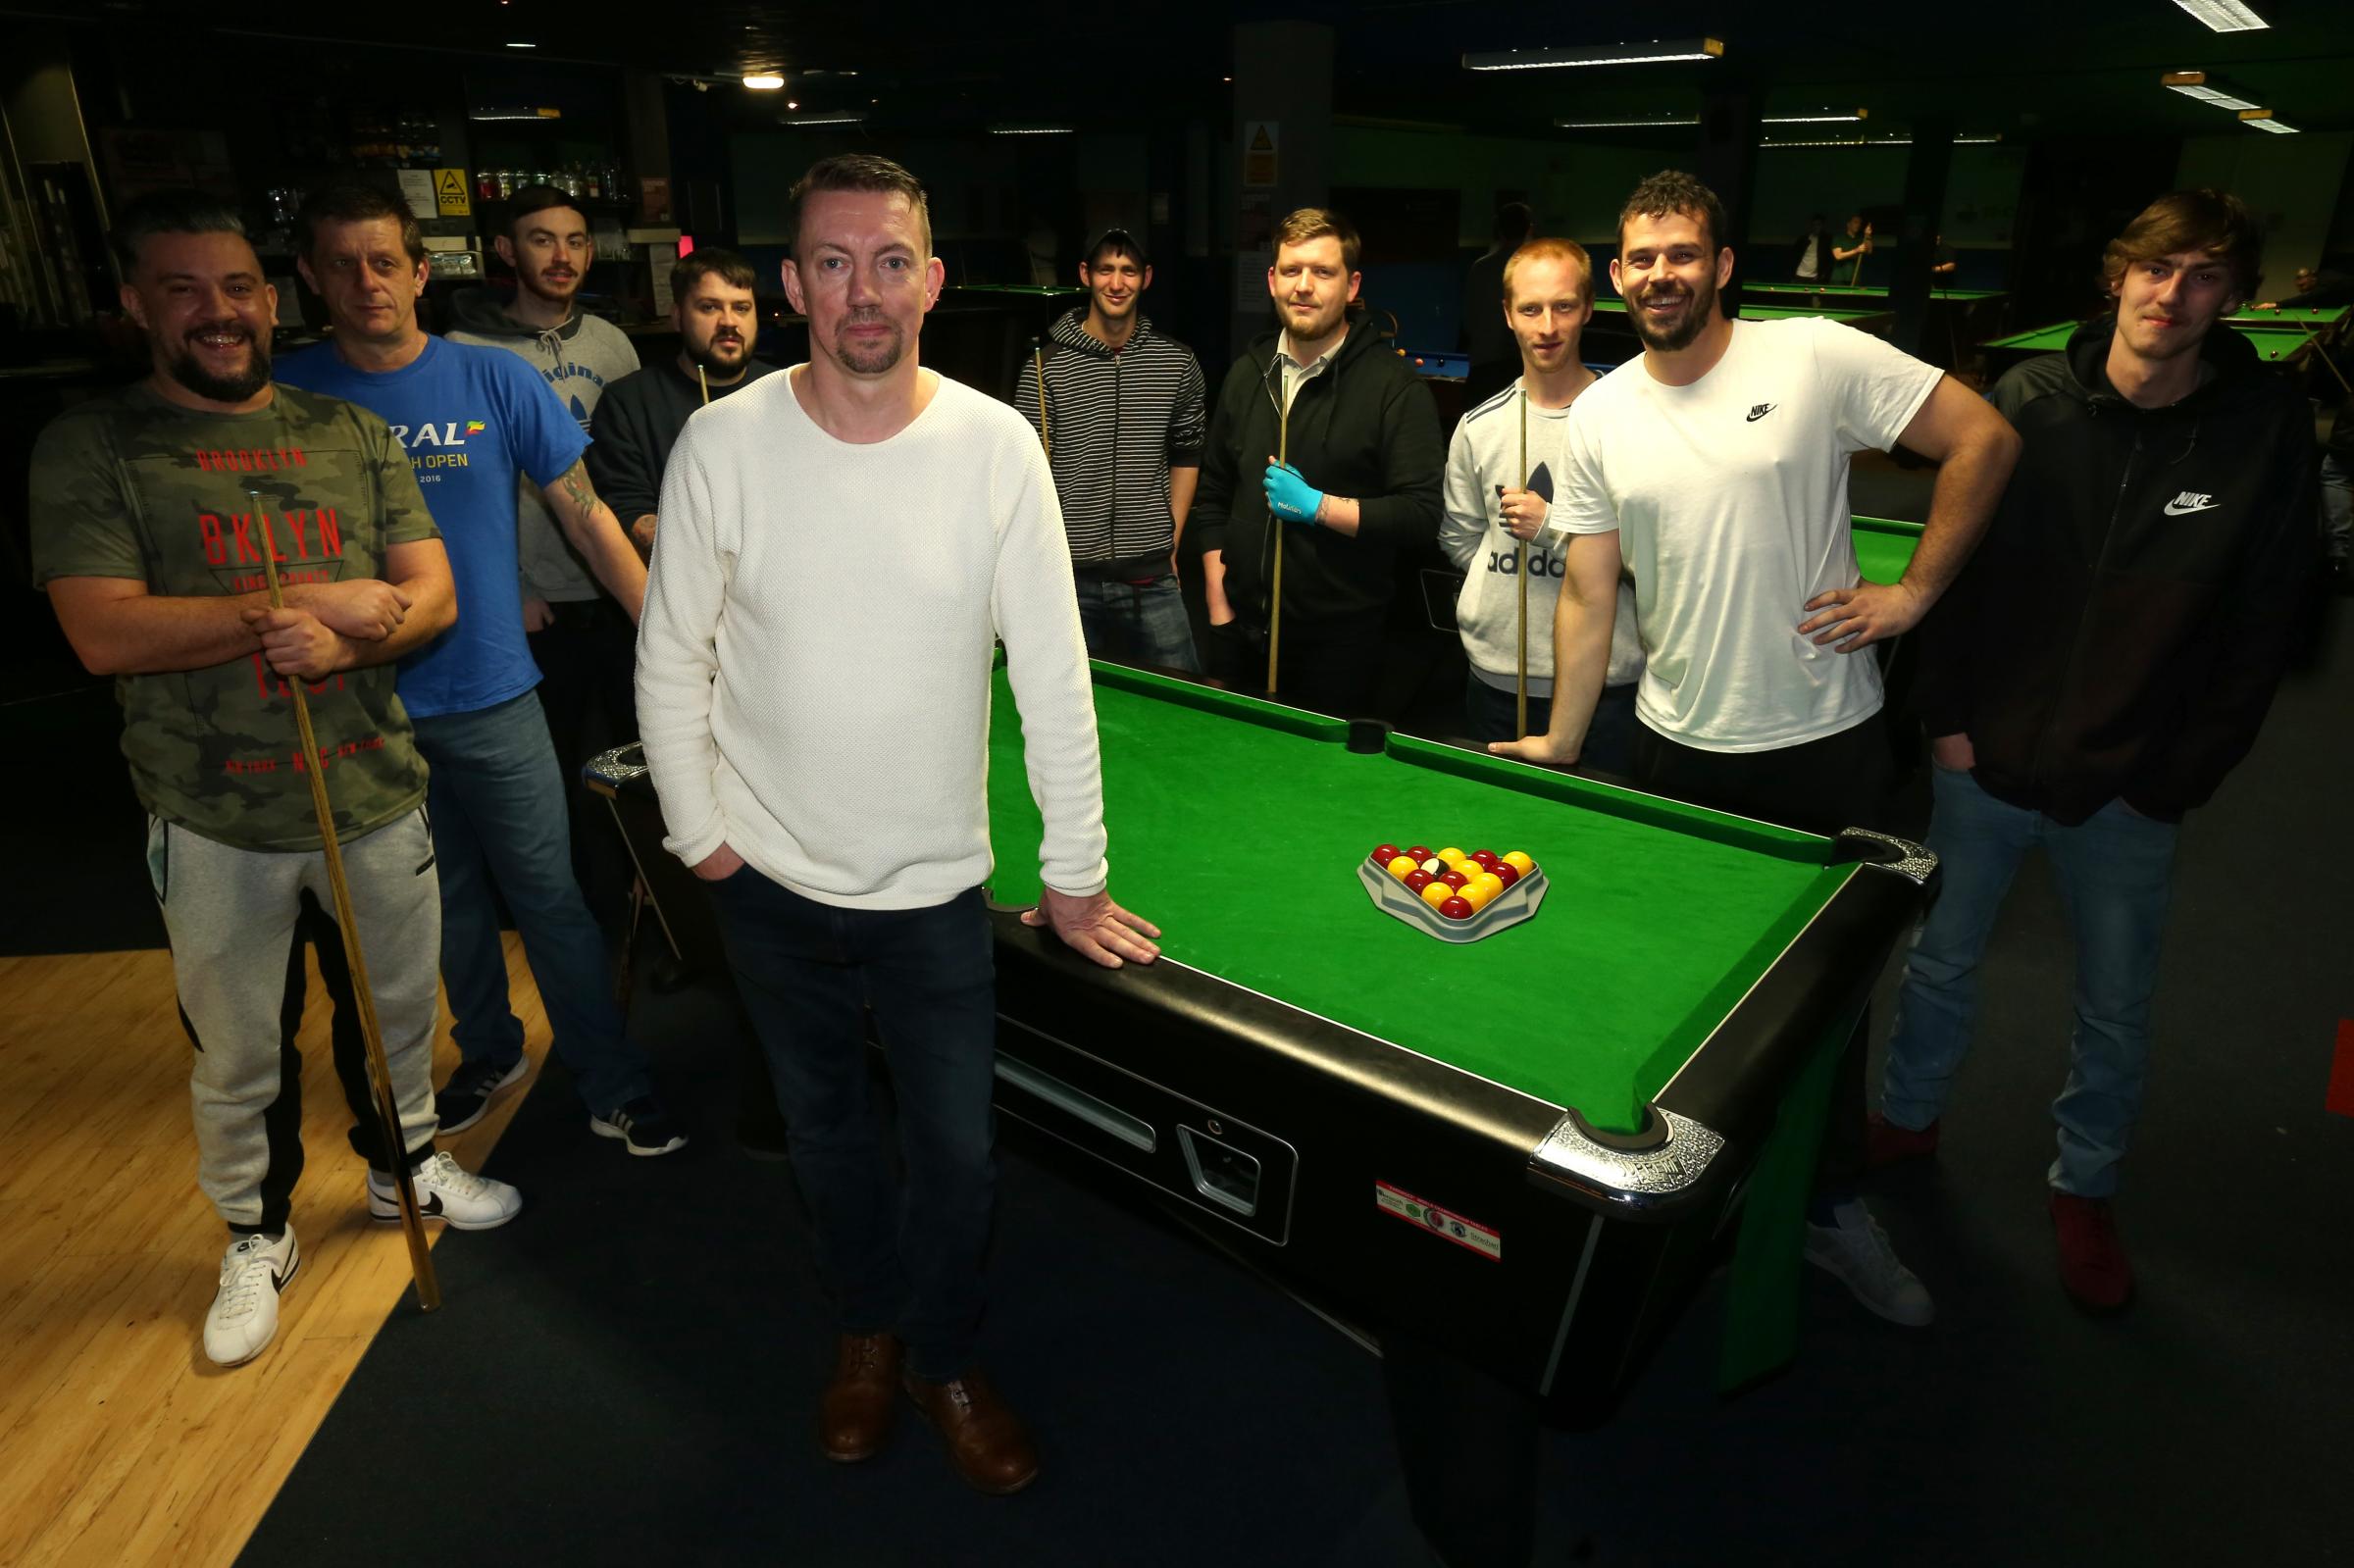 Rocket Ronnies owner Ronnie Keates gets green light for new snooker hall Daily Echo